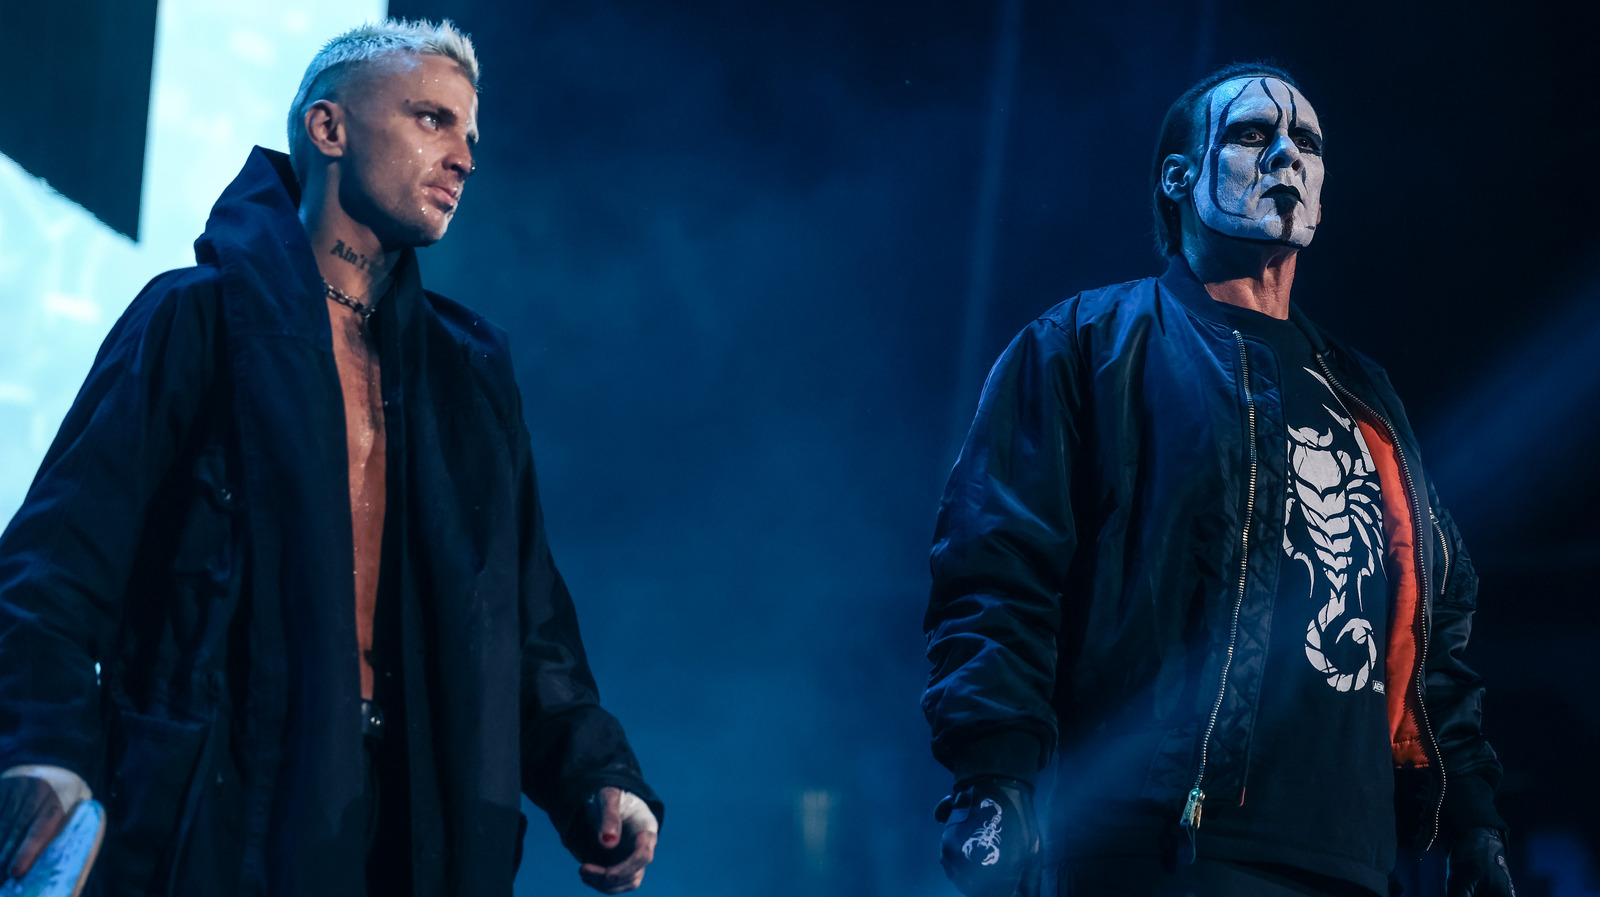 Sting's final match will not be the main event of tonight's AEW Revolution show